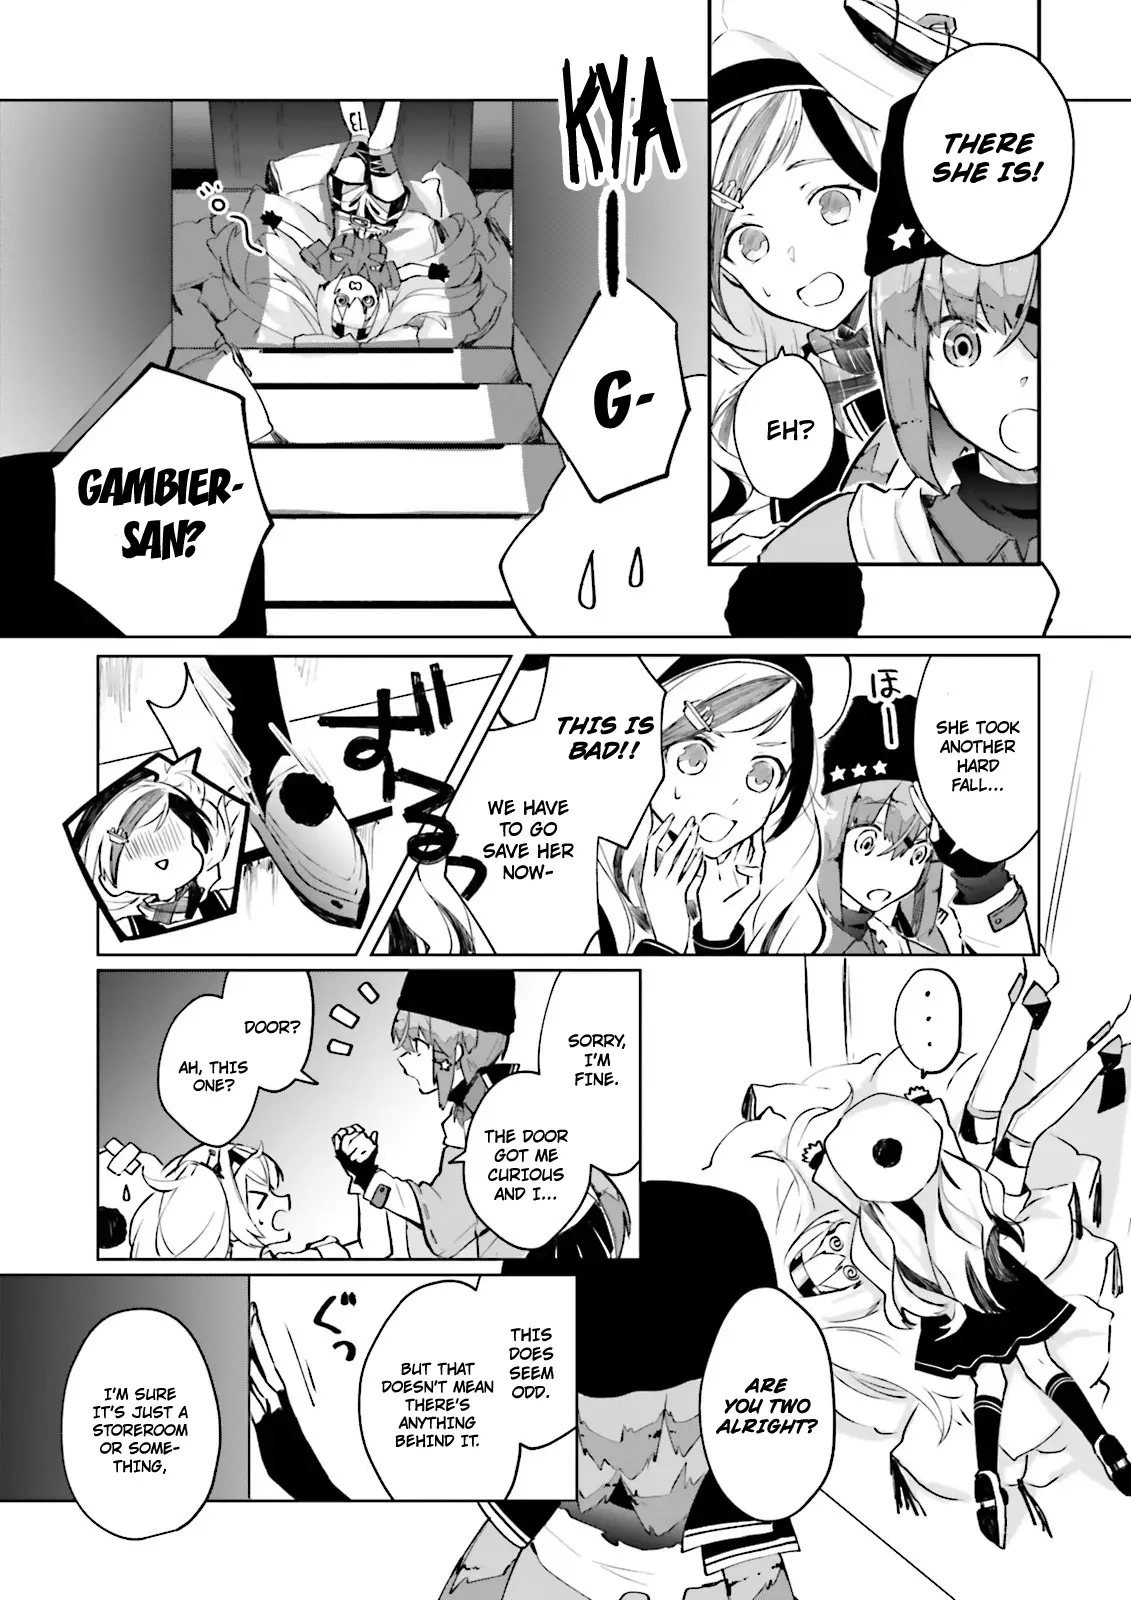 Kantai Collection -Kancolle- Tonight, Another "salute"! - 1 page 12